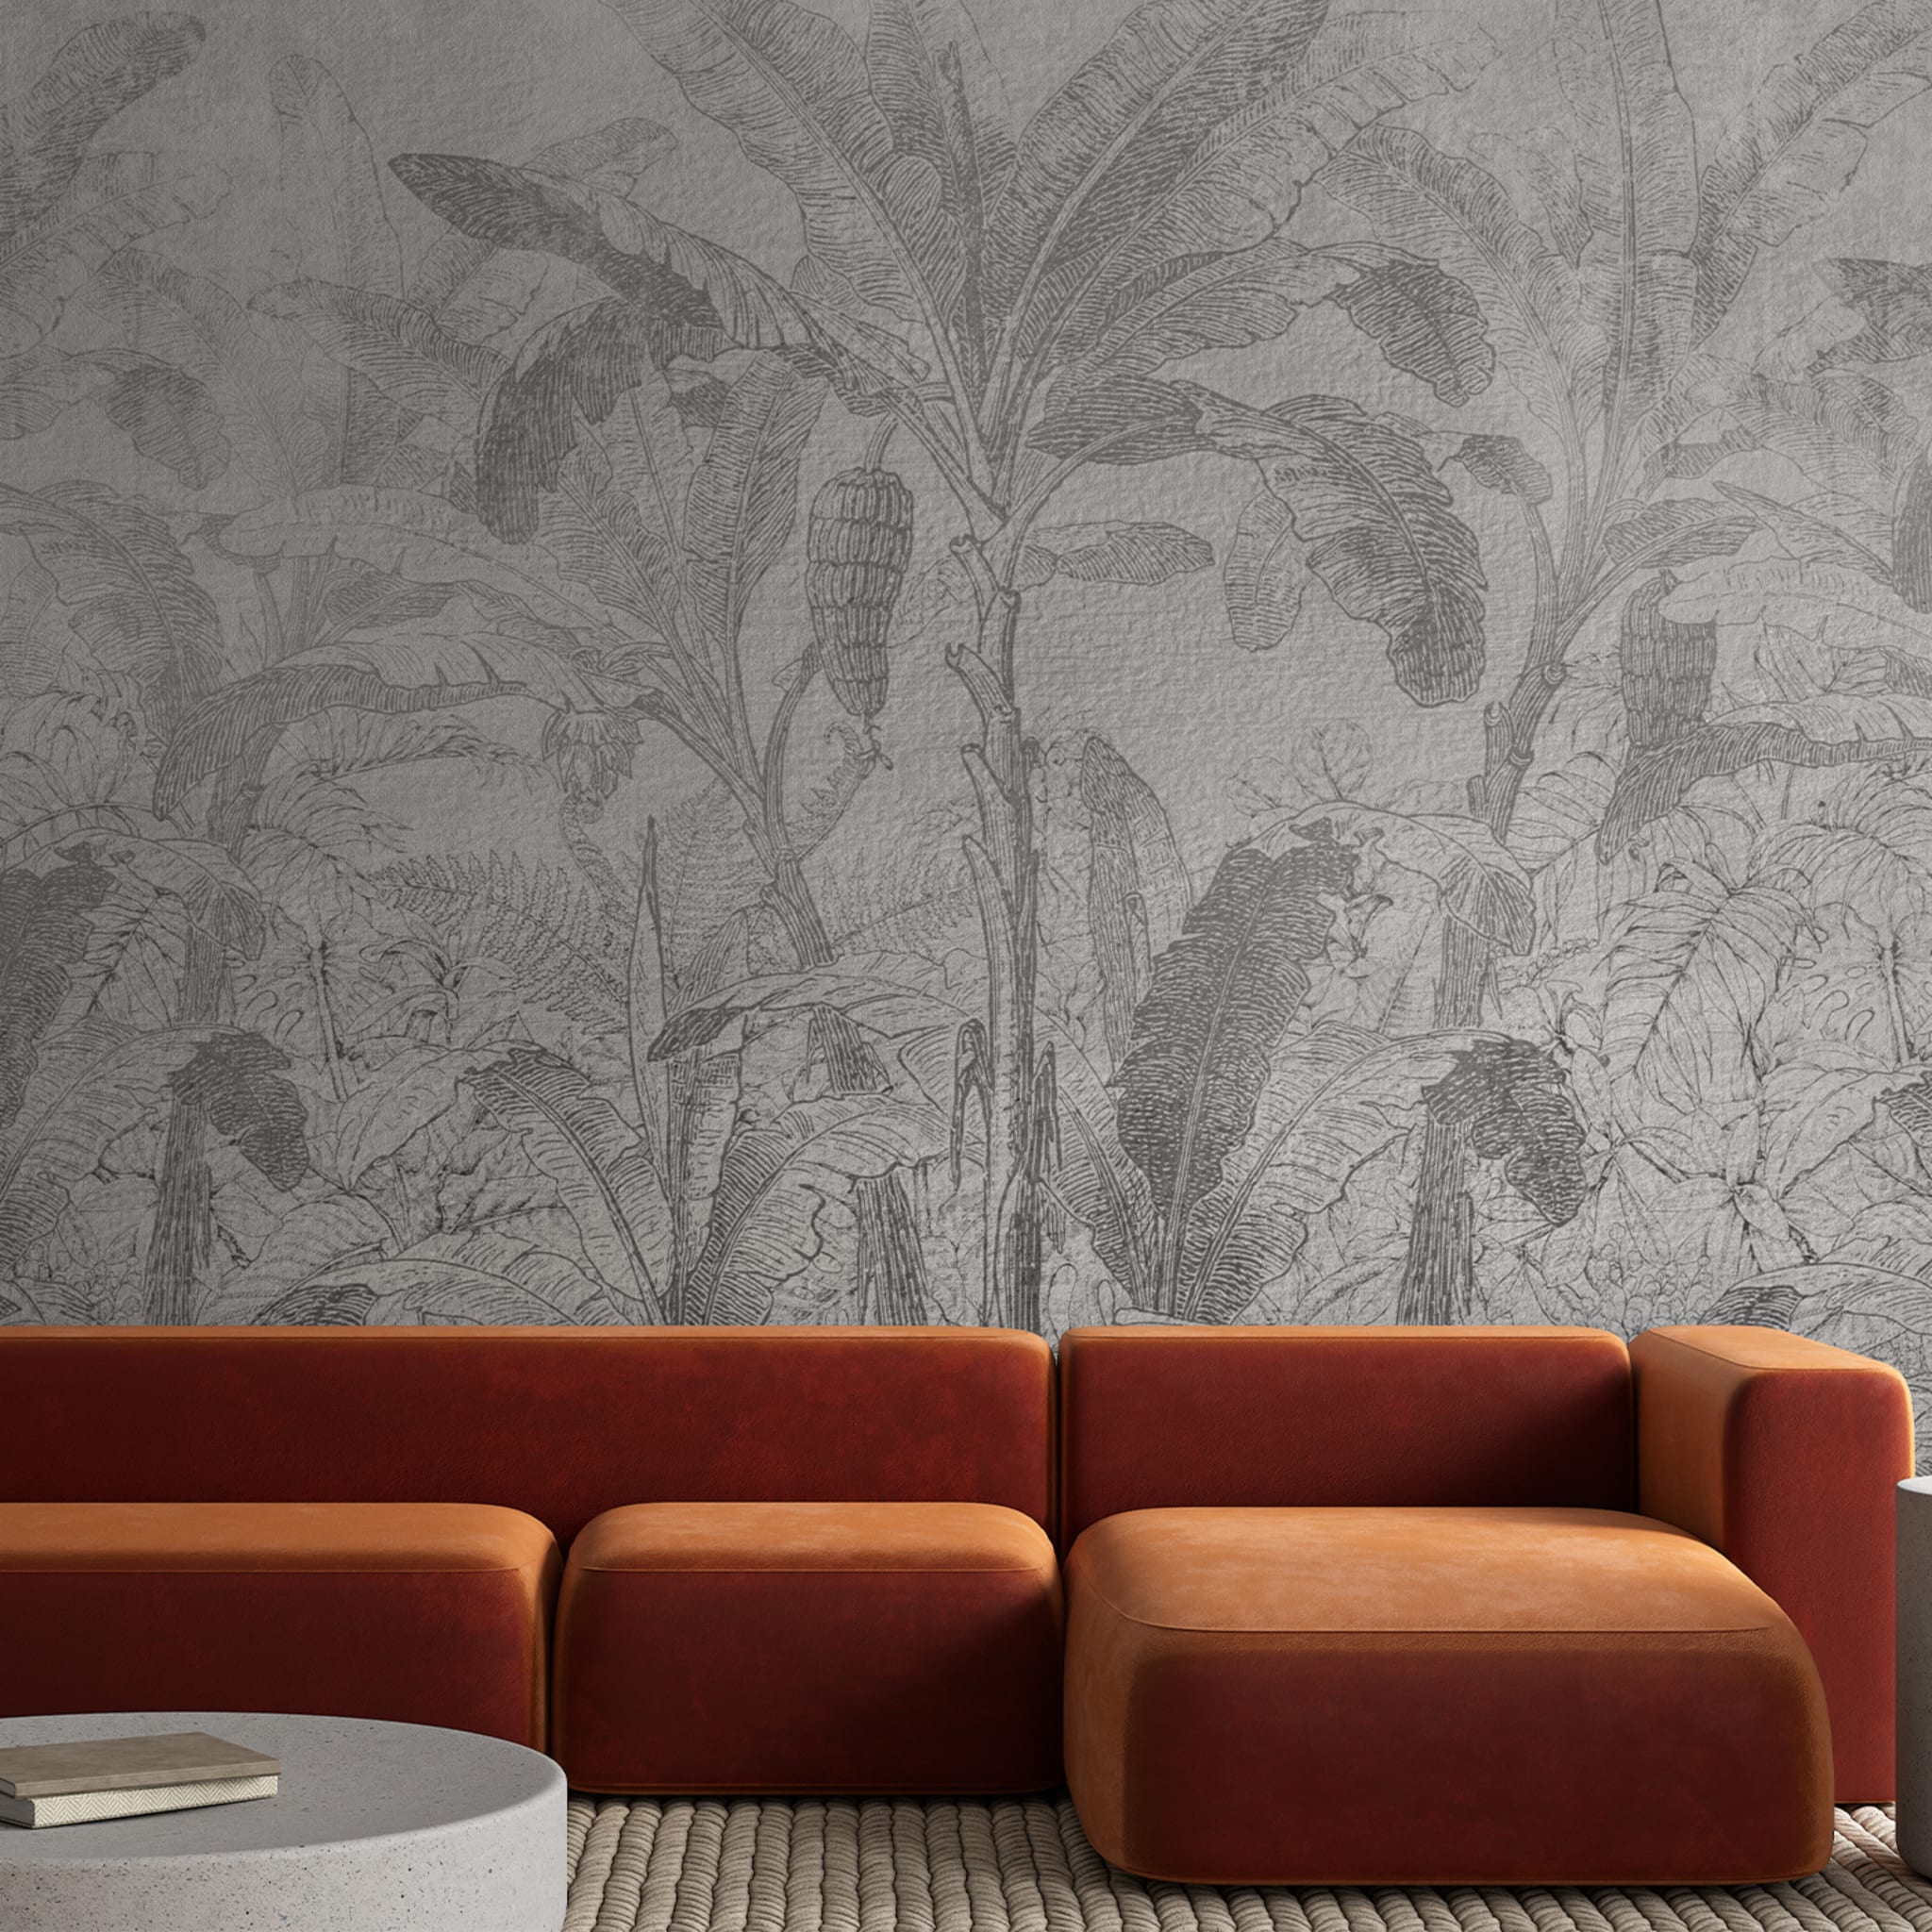 Tropical forest pencil textured wallpaper - Alternative view 1